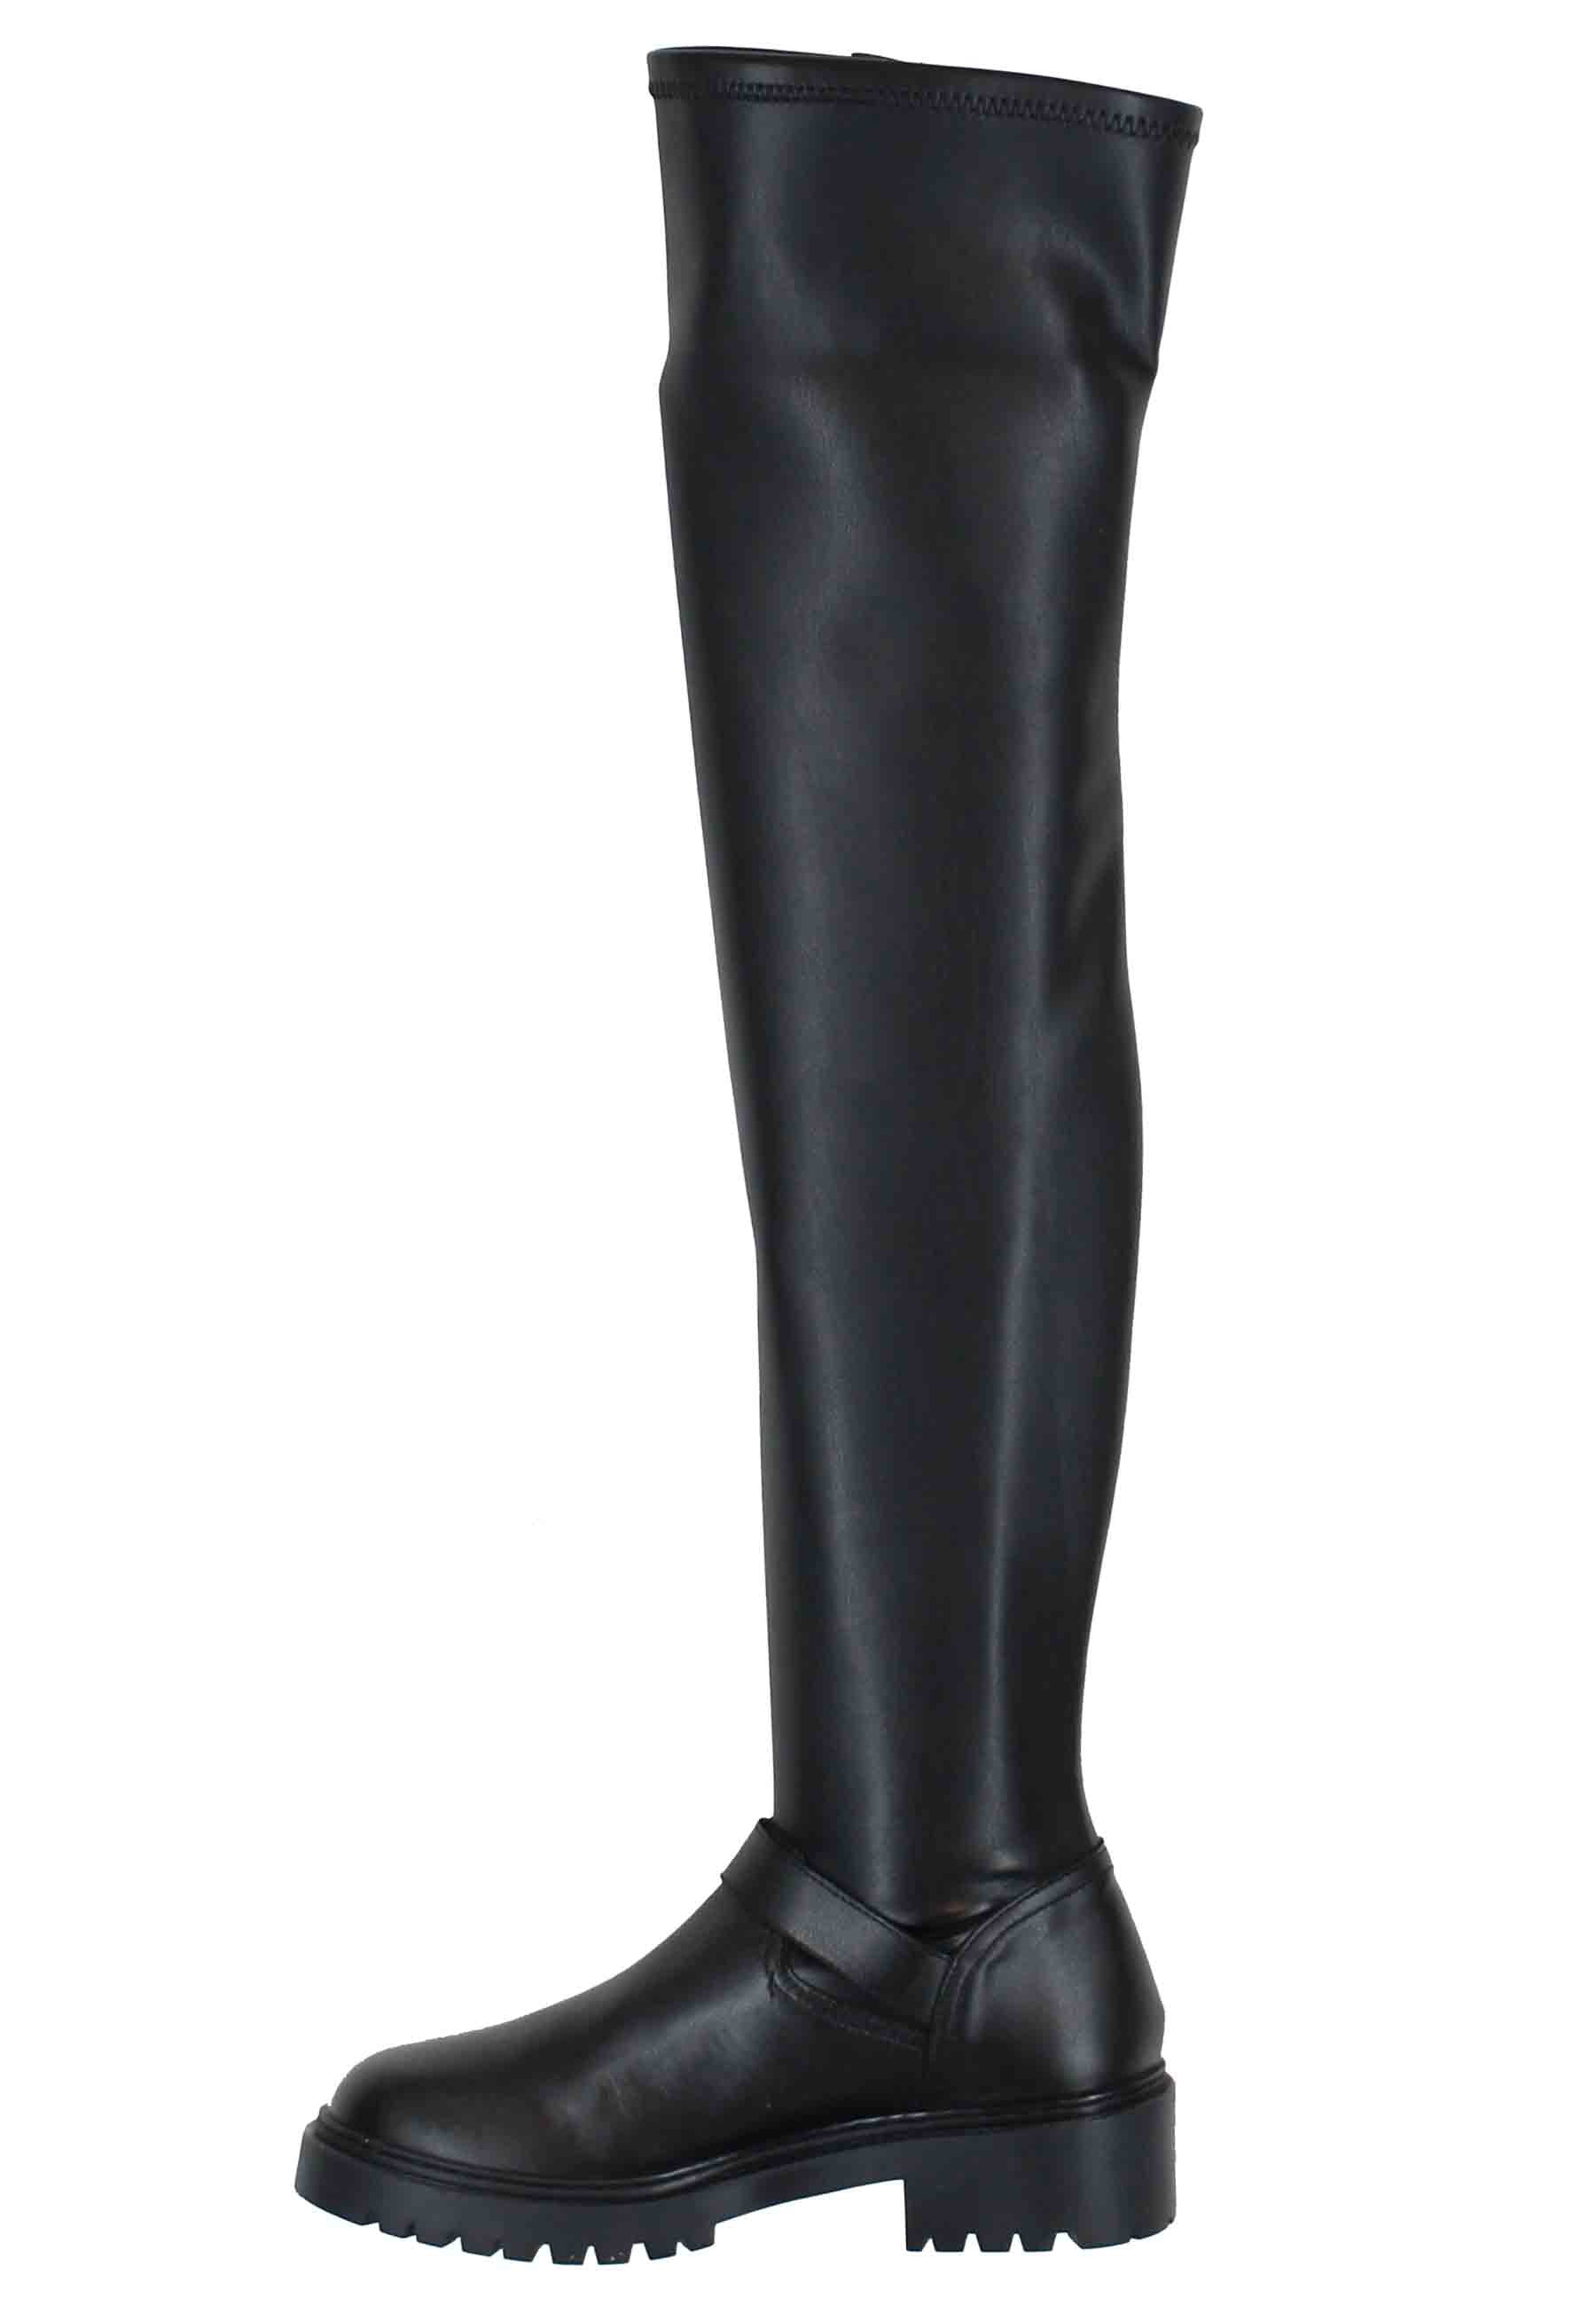 Women's high boot boots in black leather and lug sole